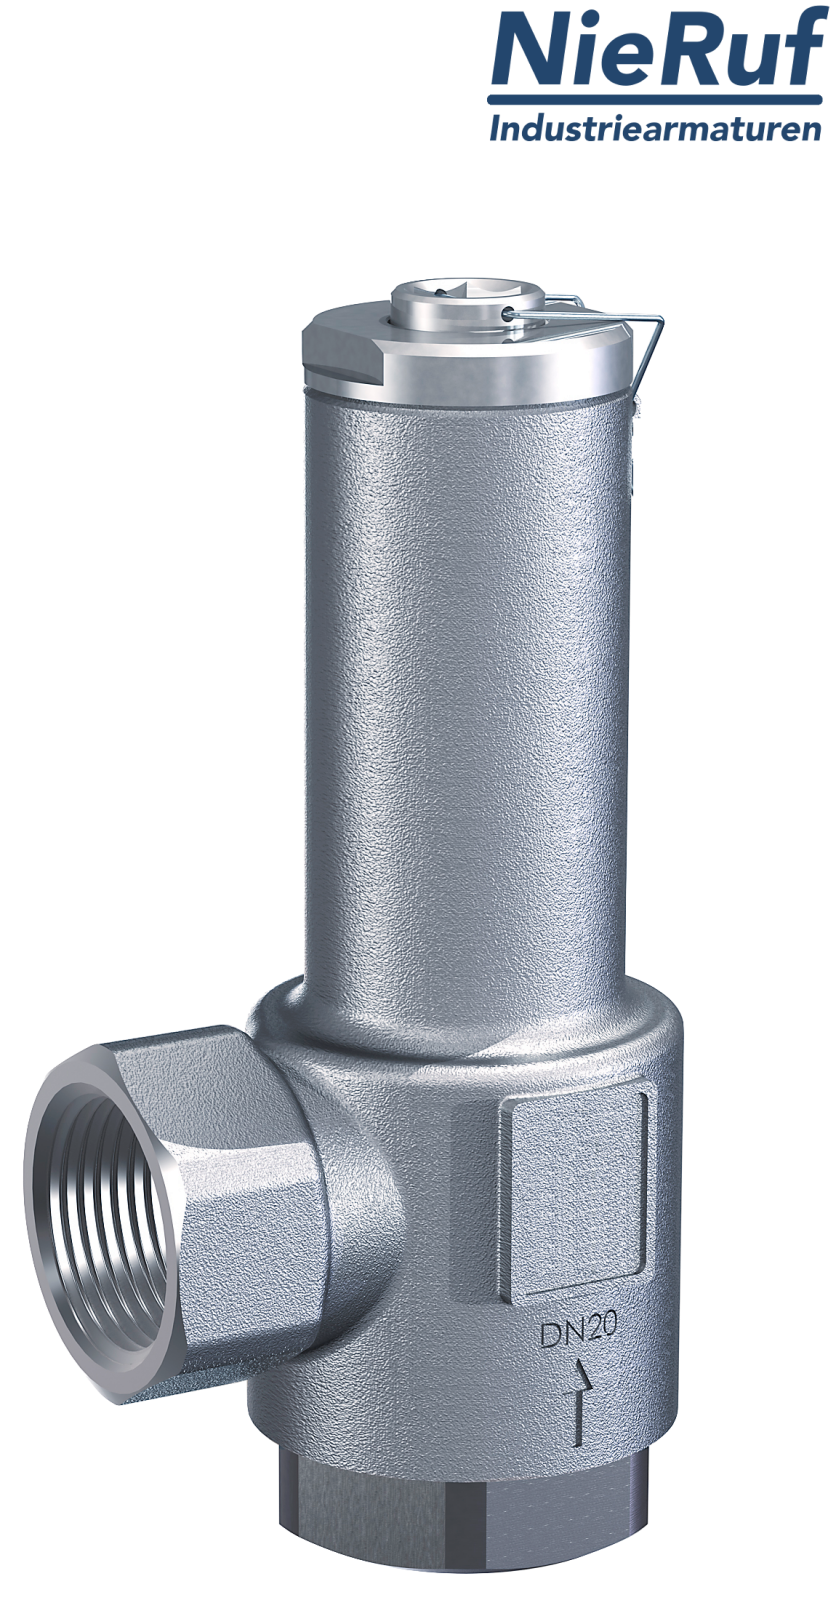 angle-type overflow valve 3/4" inch fm UV03 stainless steel AISI 316L 2 - 12 bar